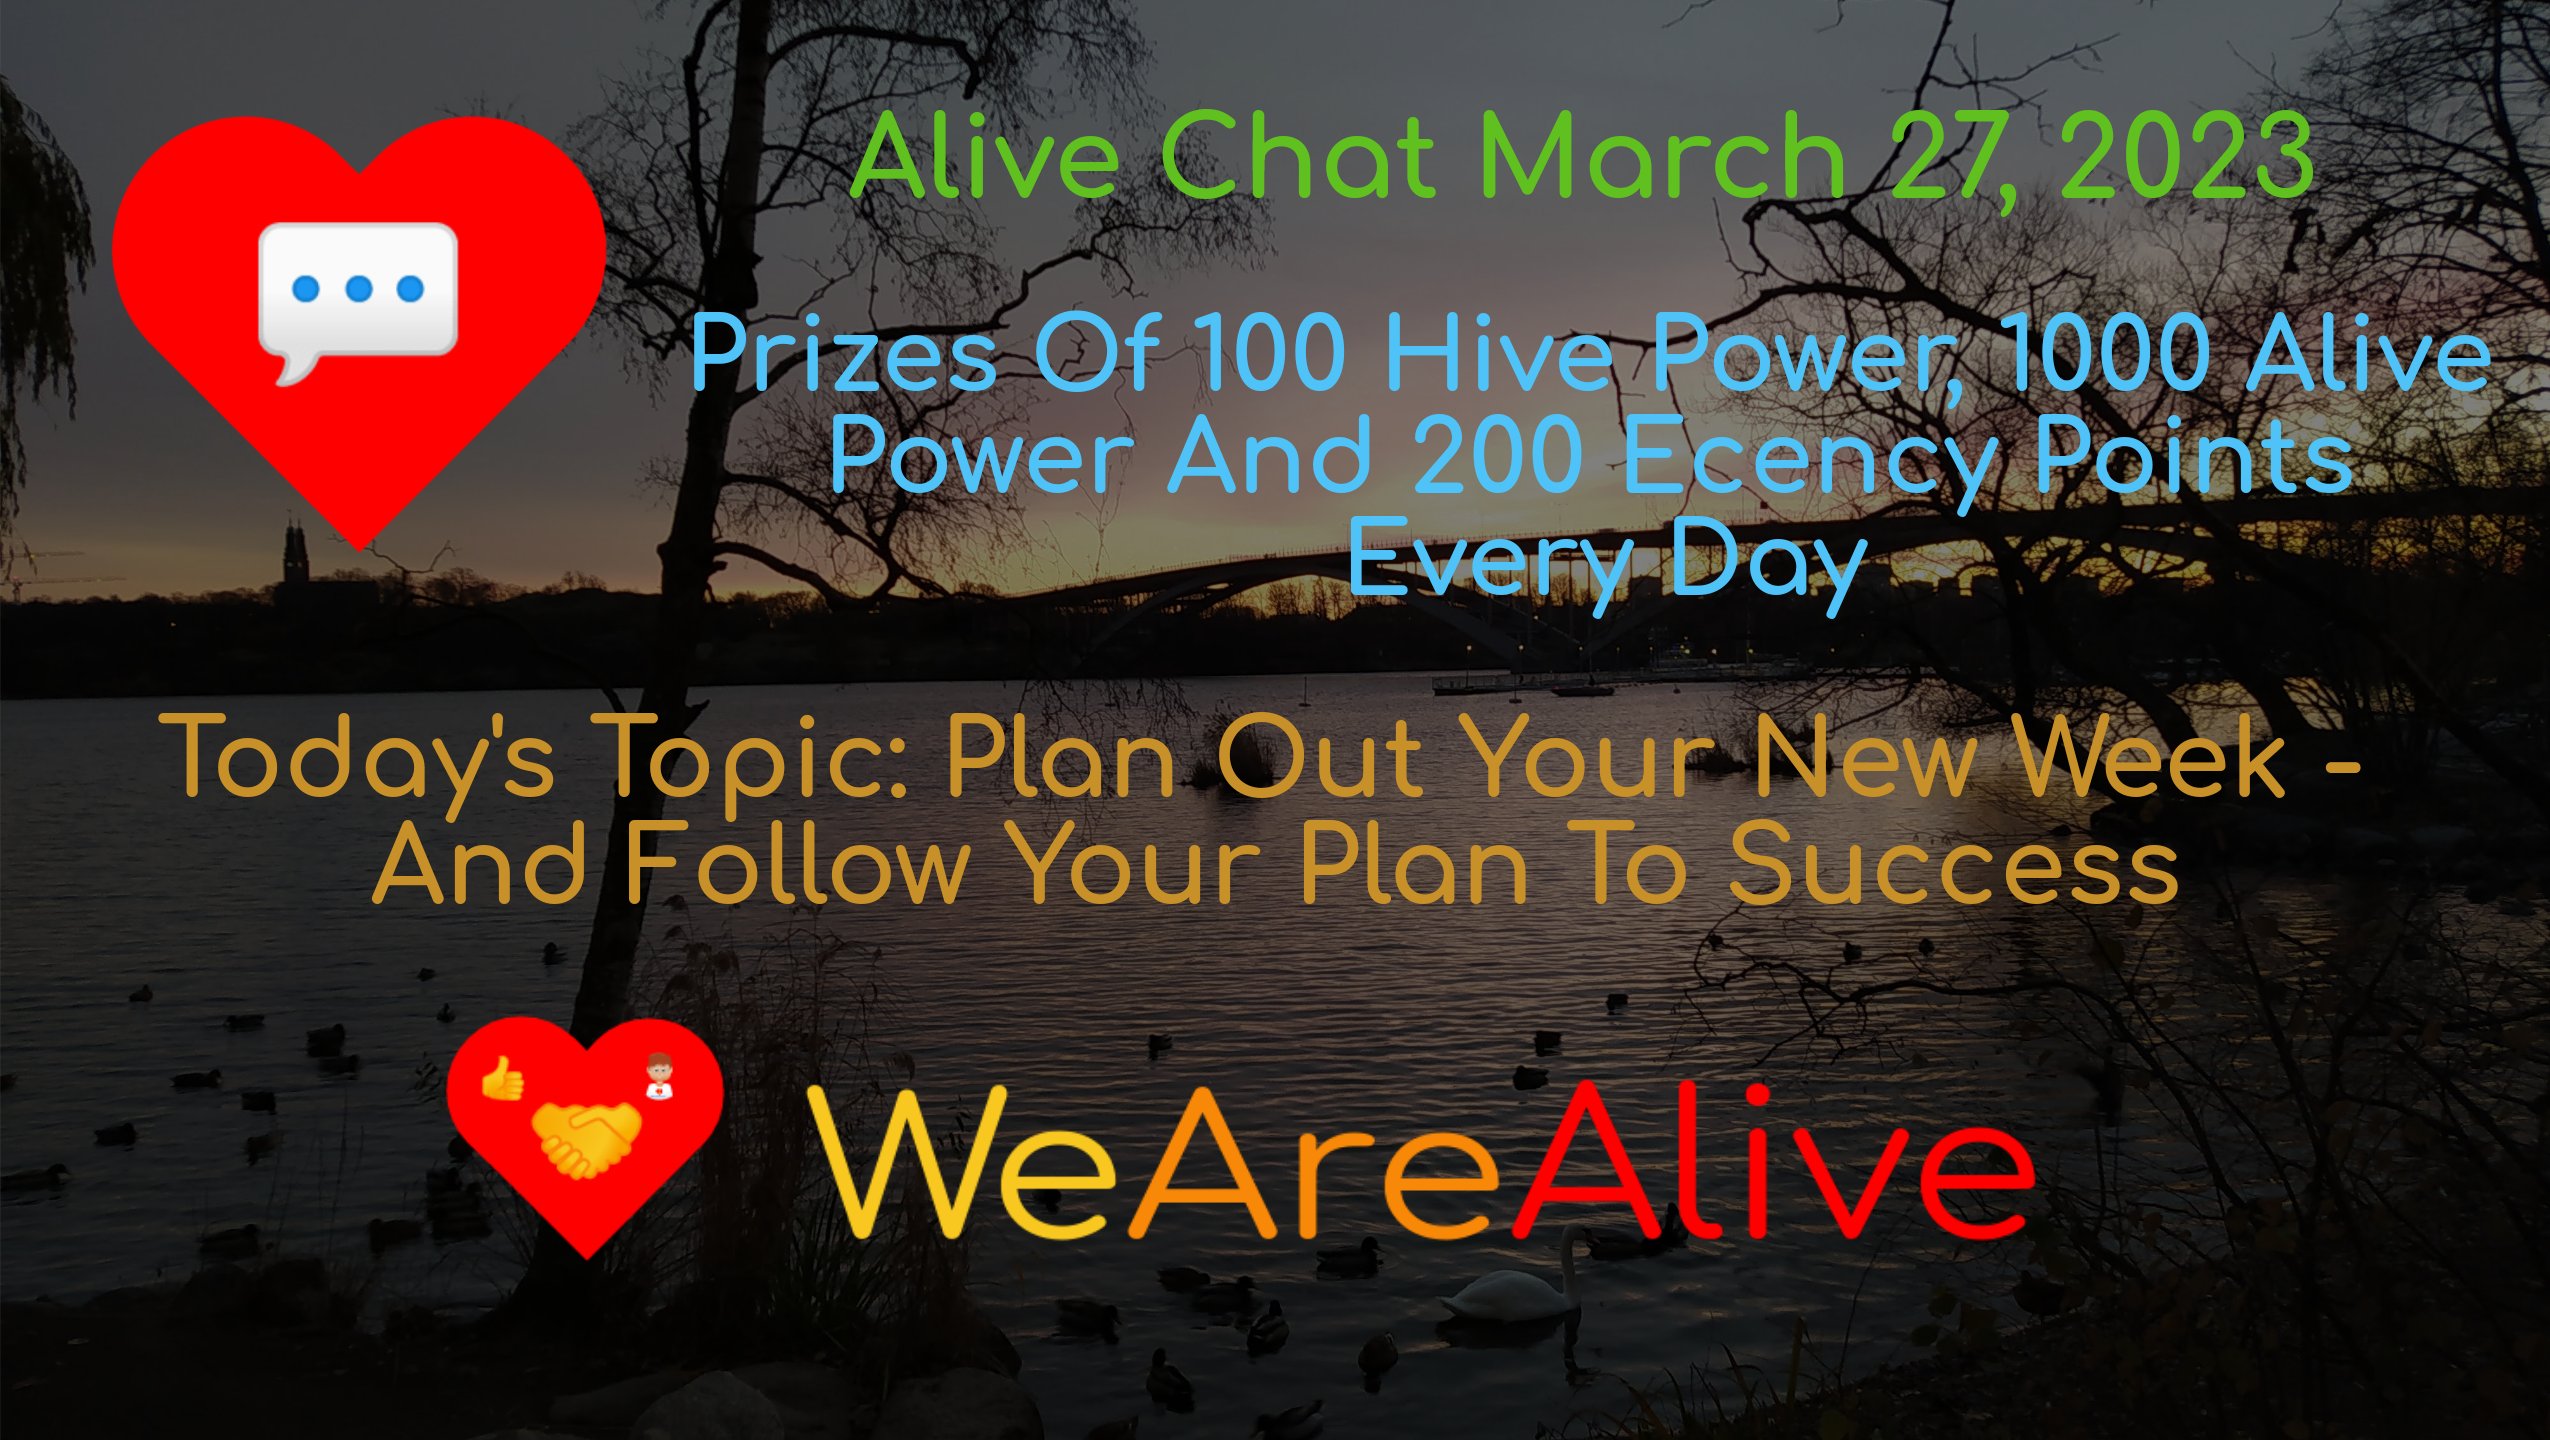 @alive.chat/alive-chat-march-27-2023